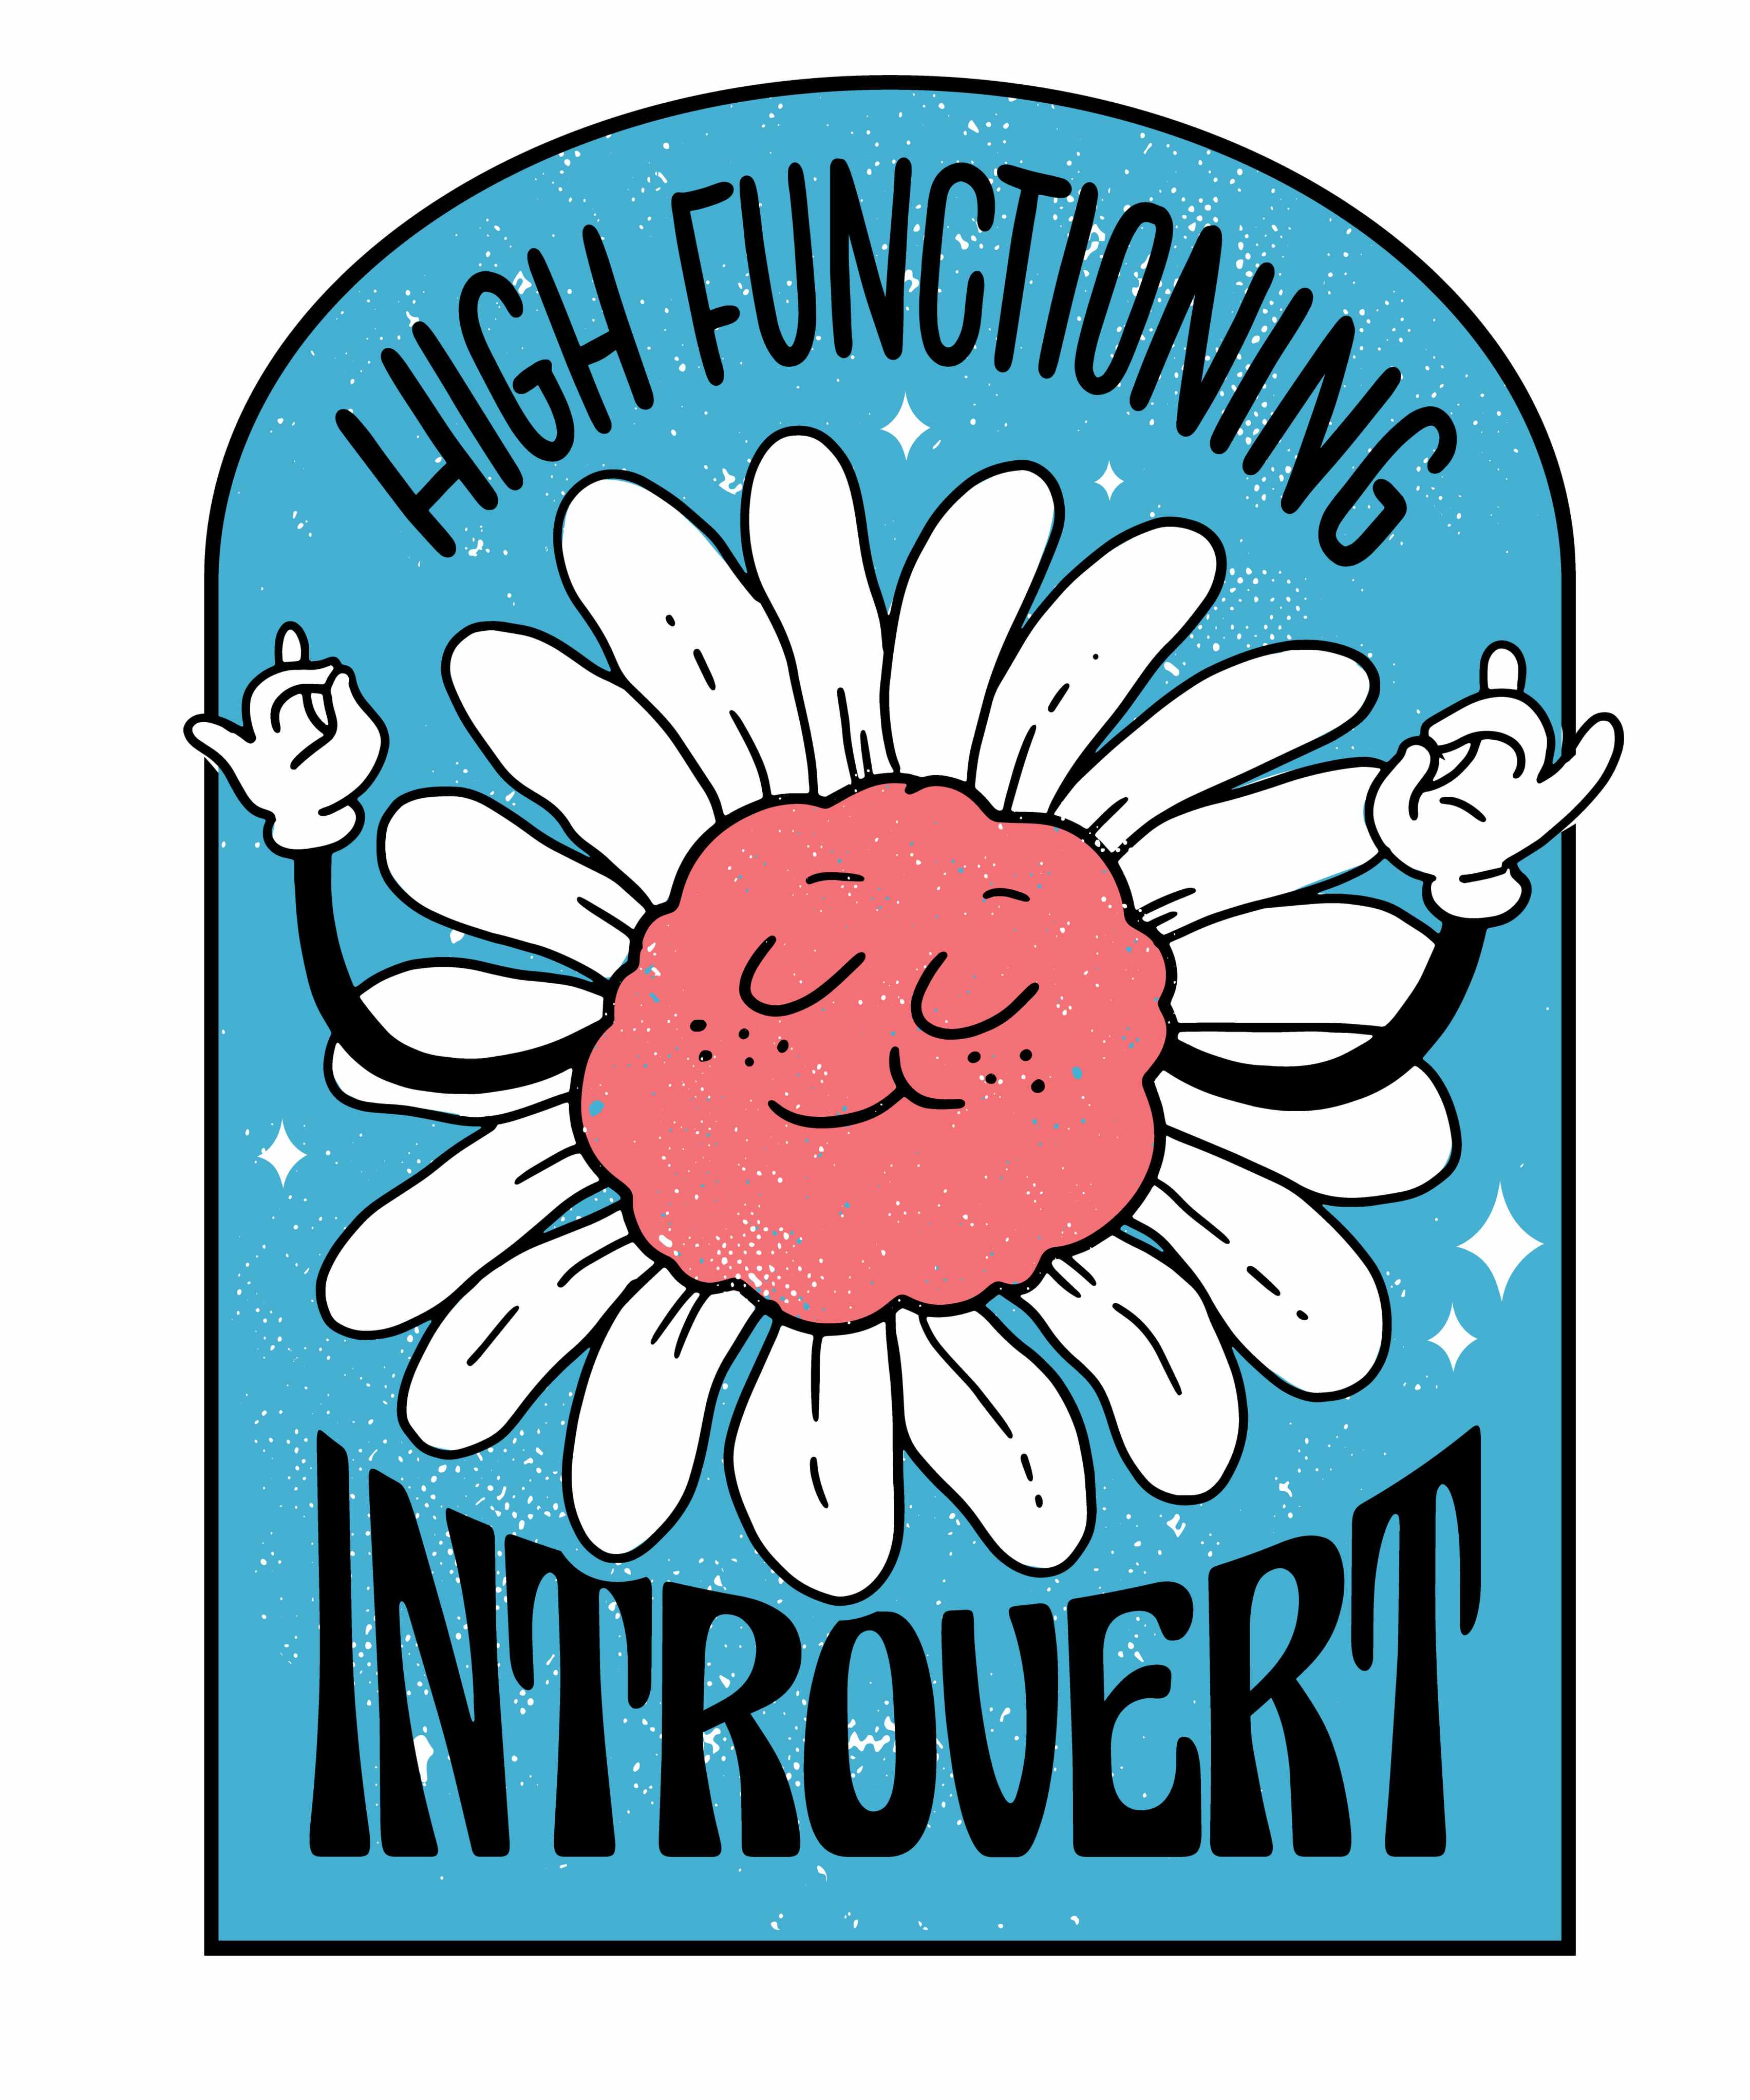 A cartoon flower with the words "High Functional Interovert" printed on a T-shirt.